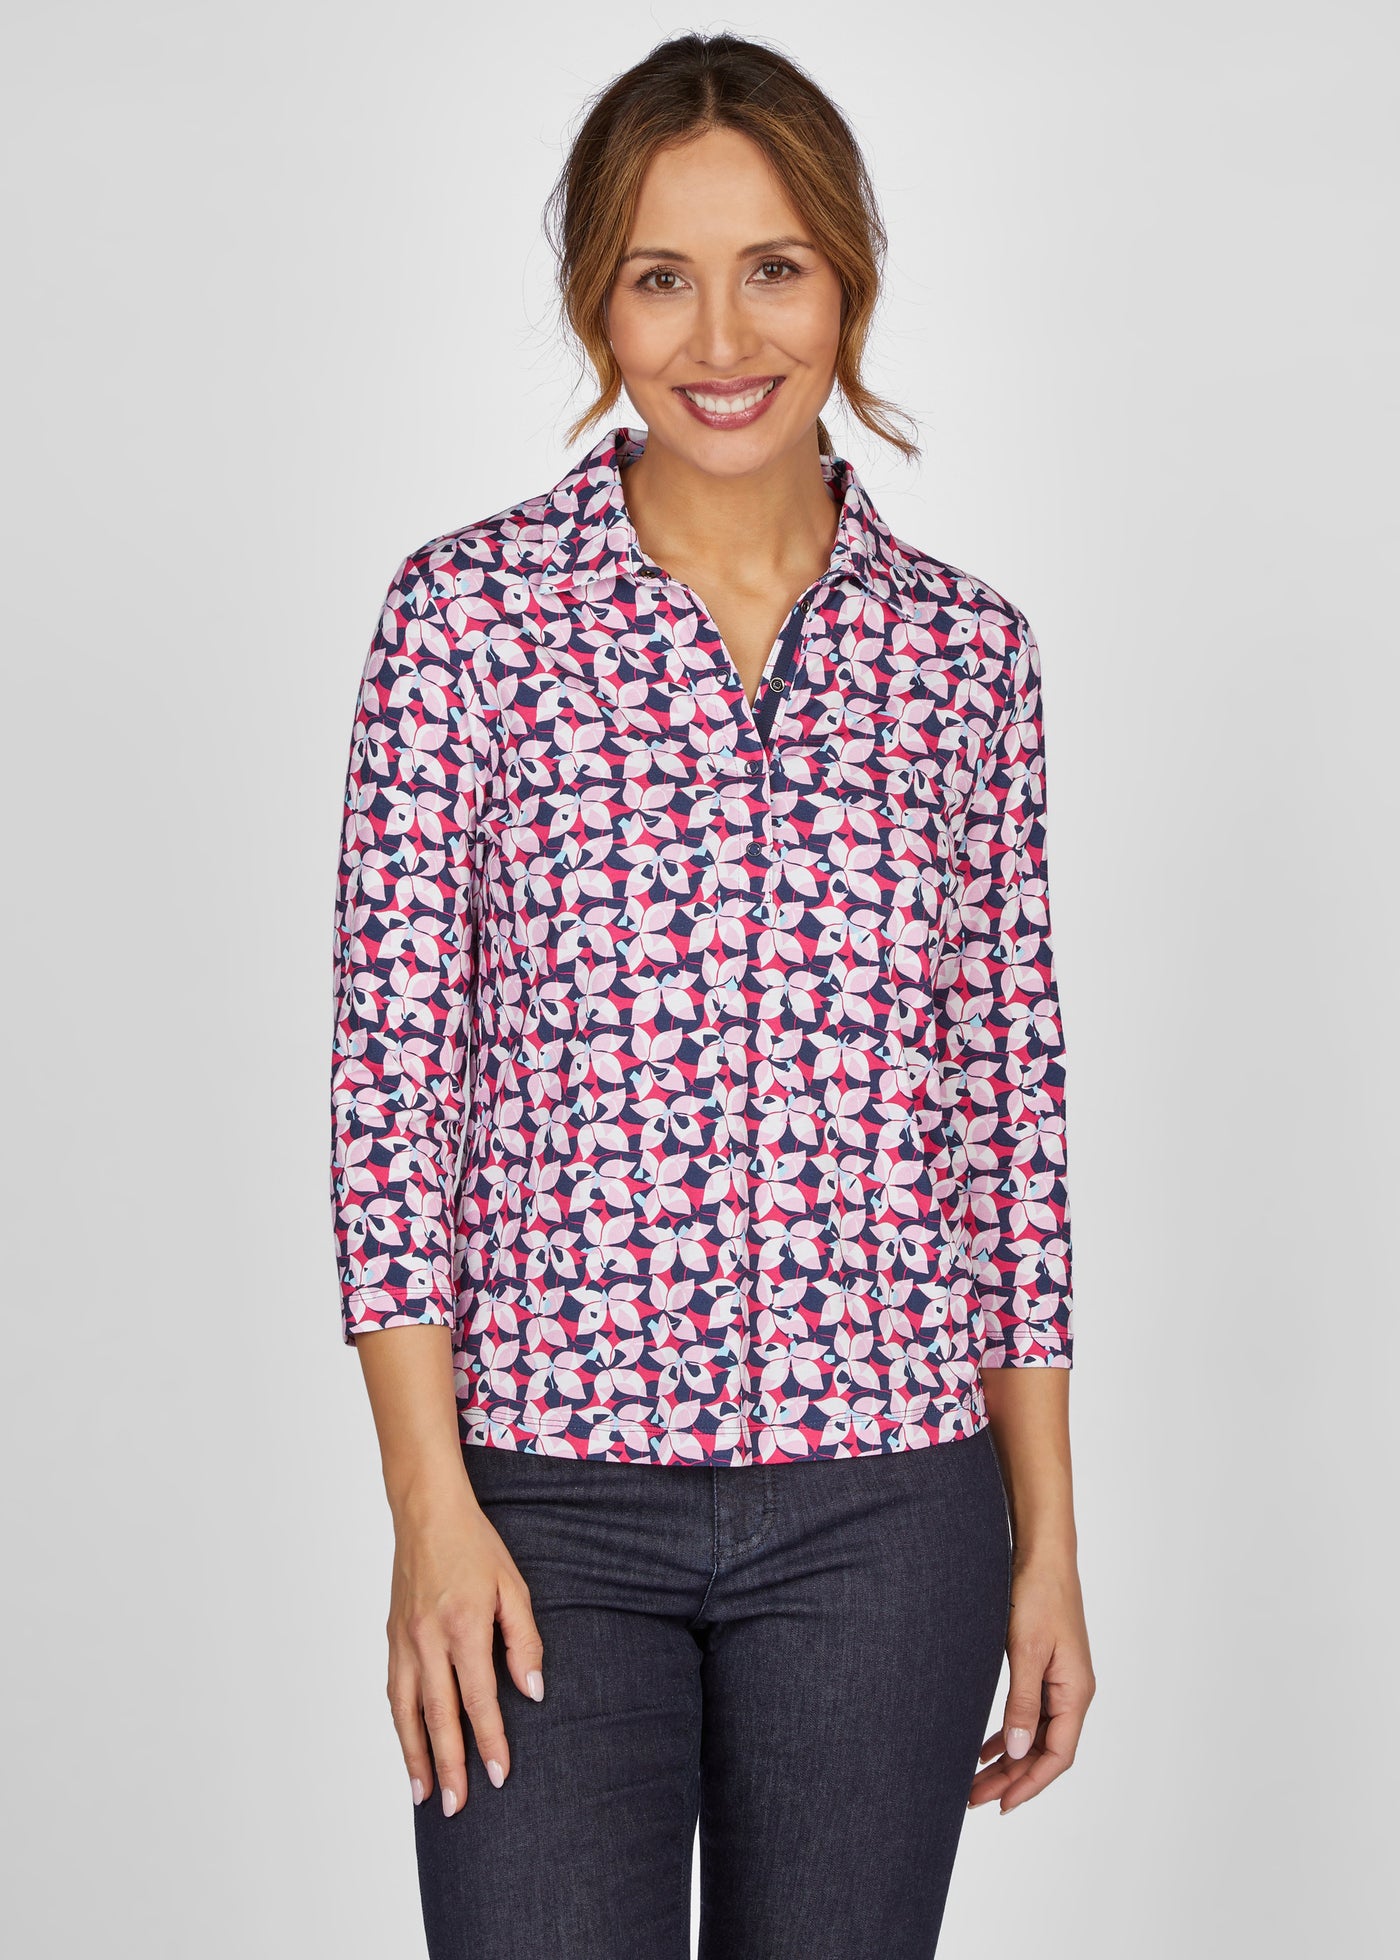 Pink Navy & White Geometric Print Shirt Top with 3/4 Sleeves